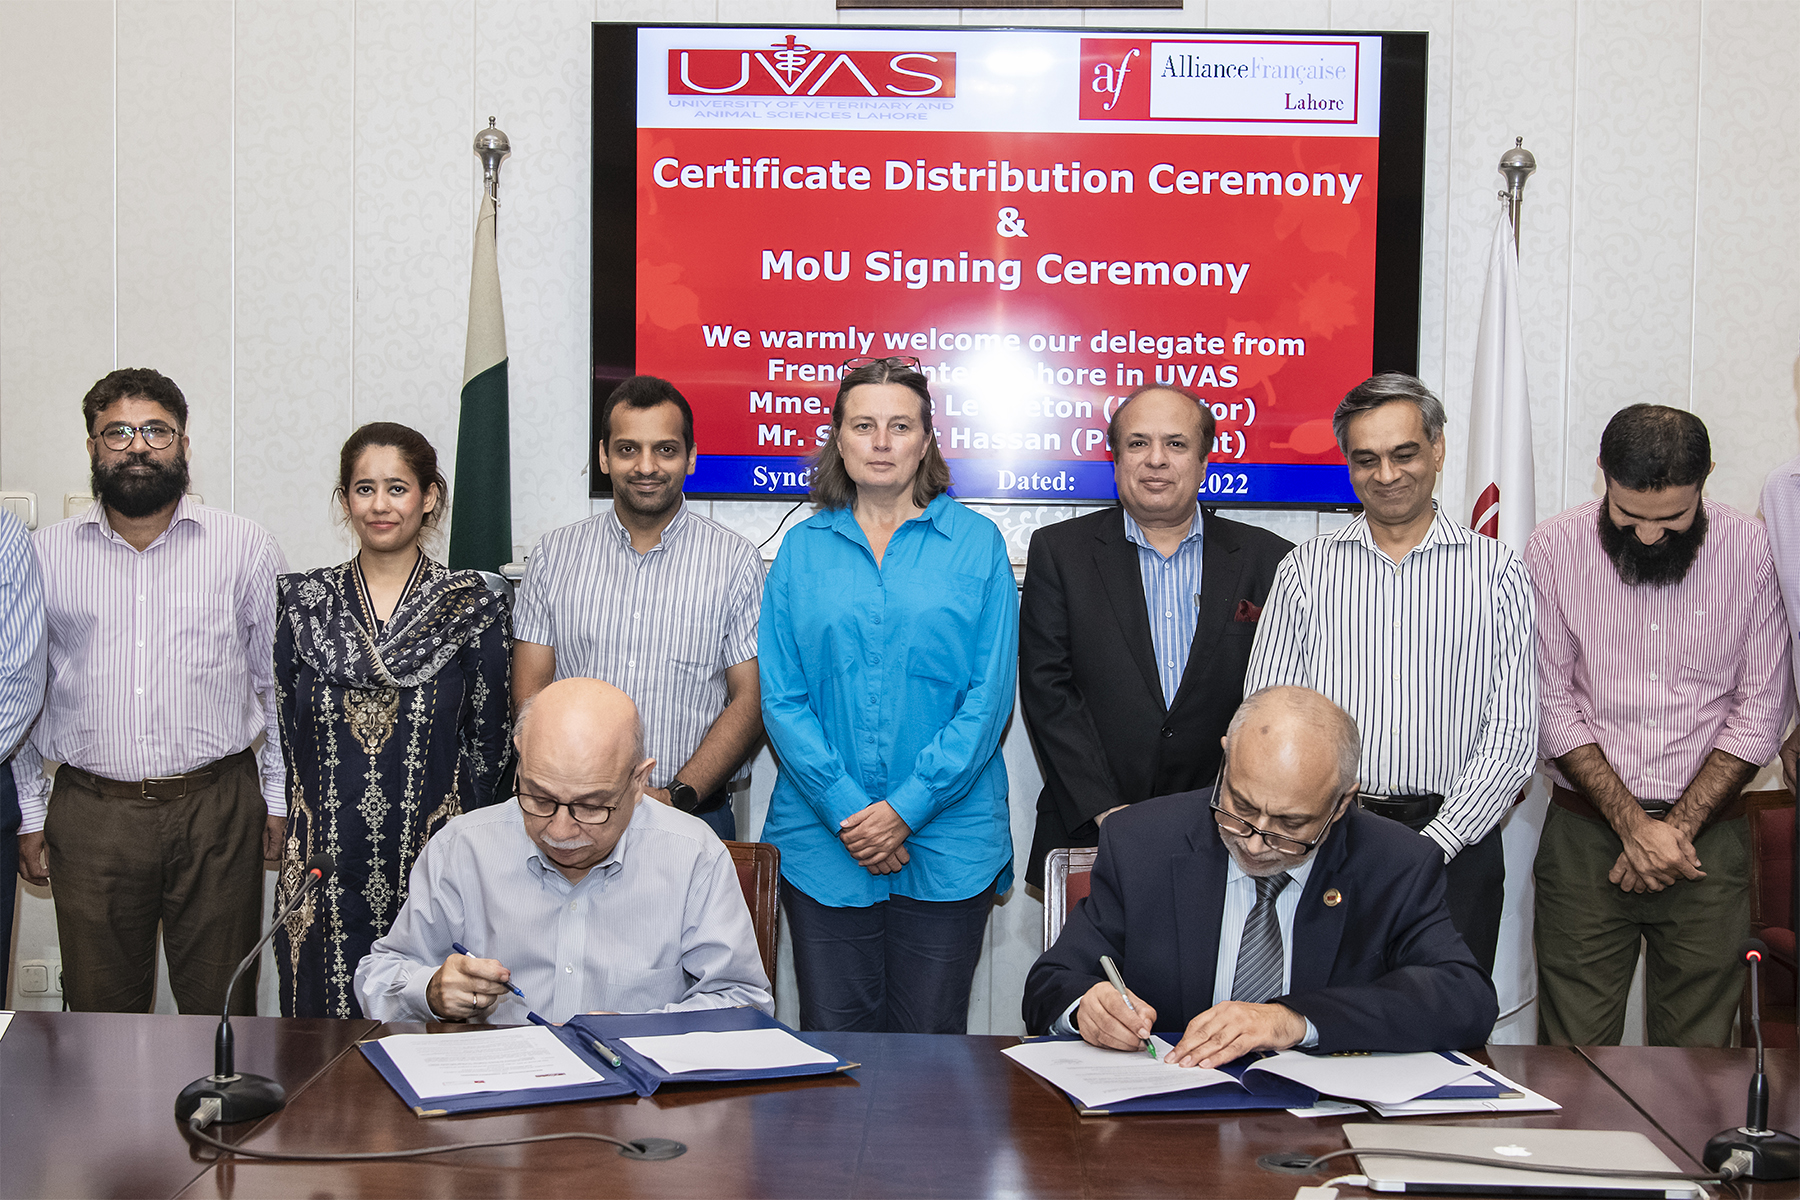 UVAS inks MoU with Alliance Française of Lahore (AFL)